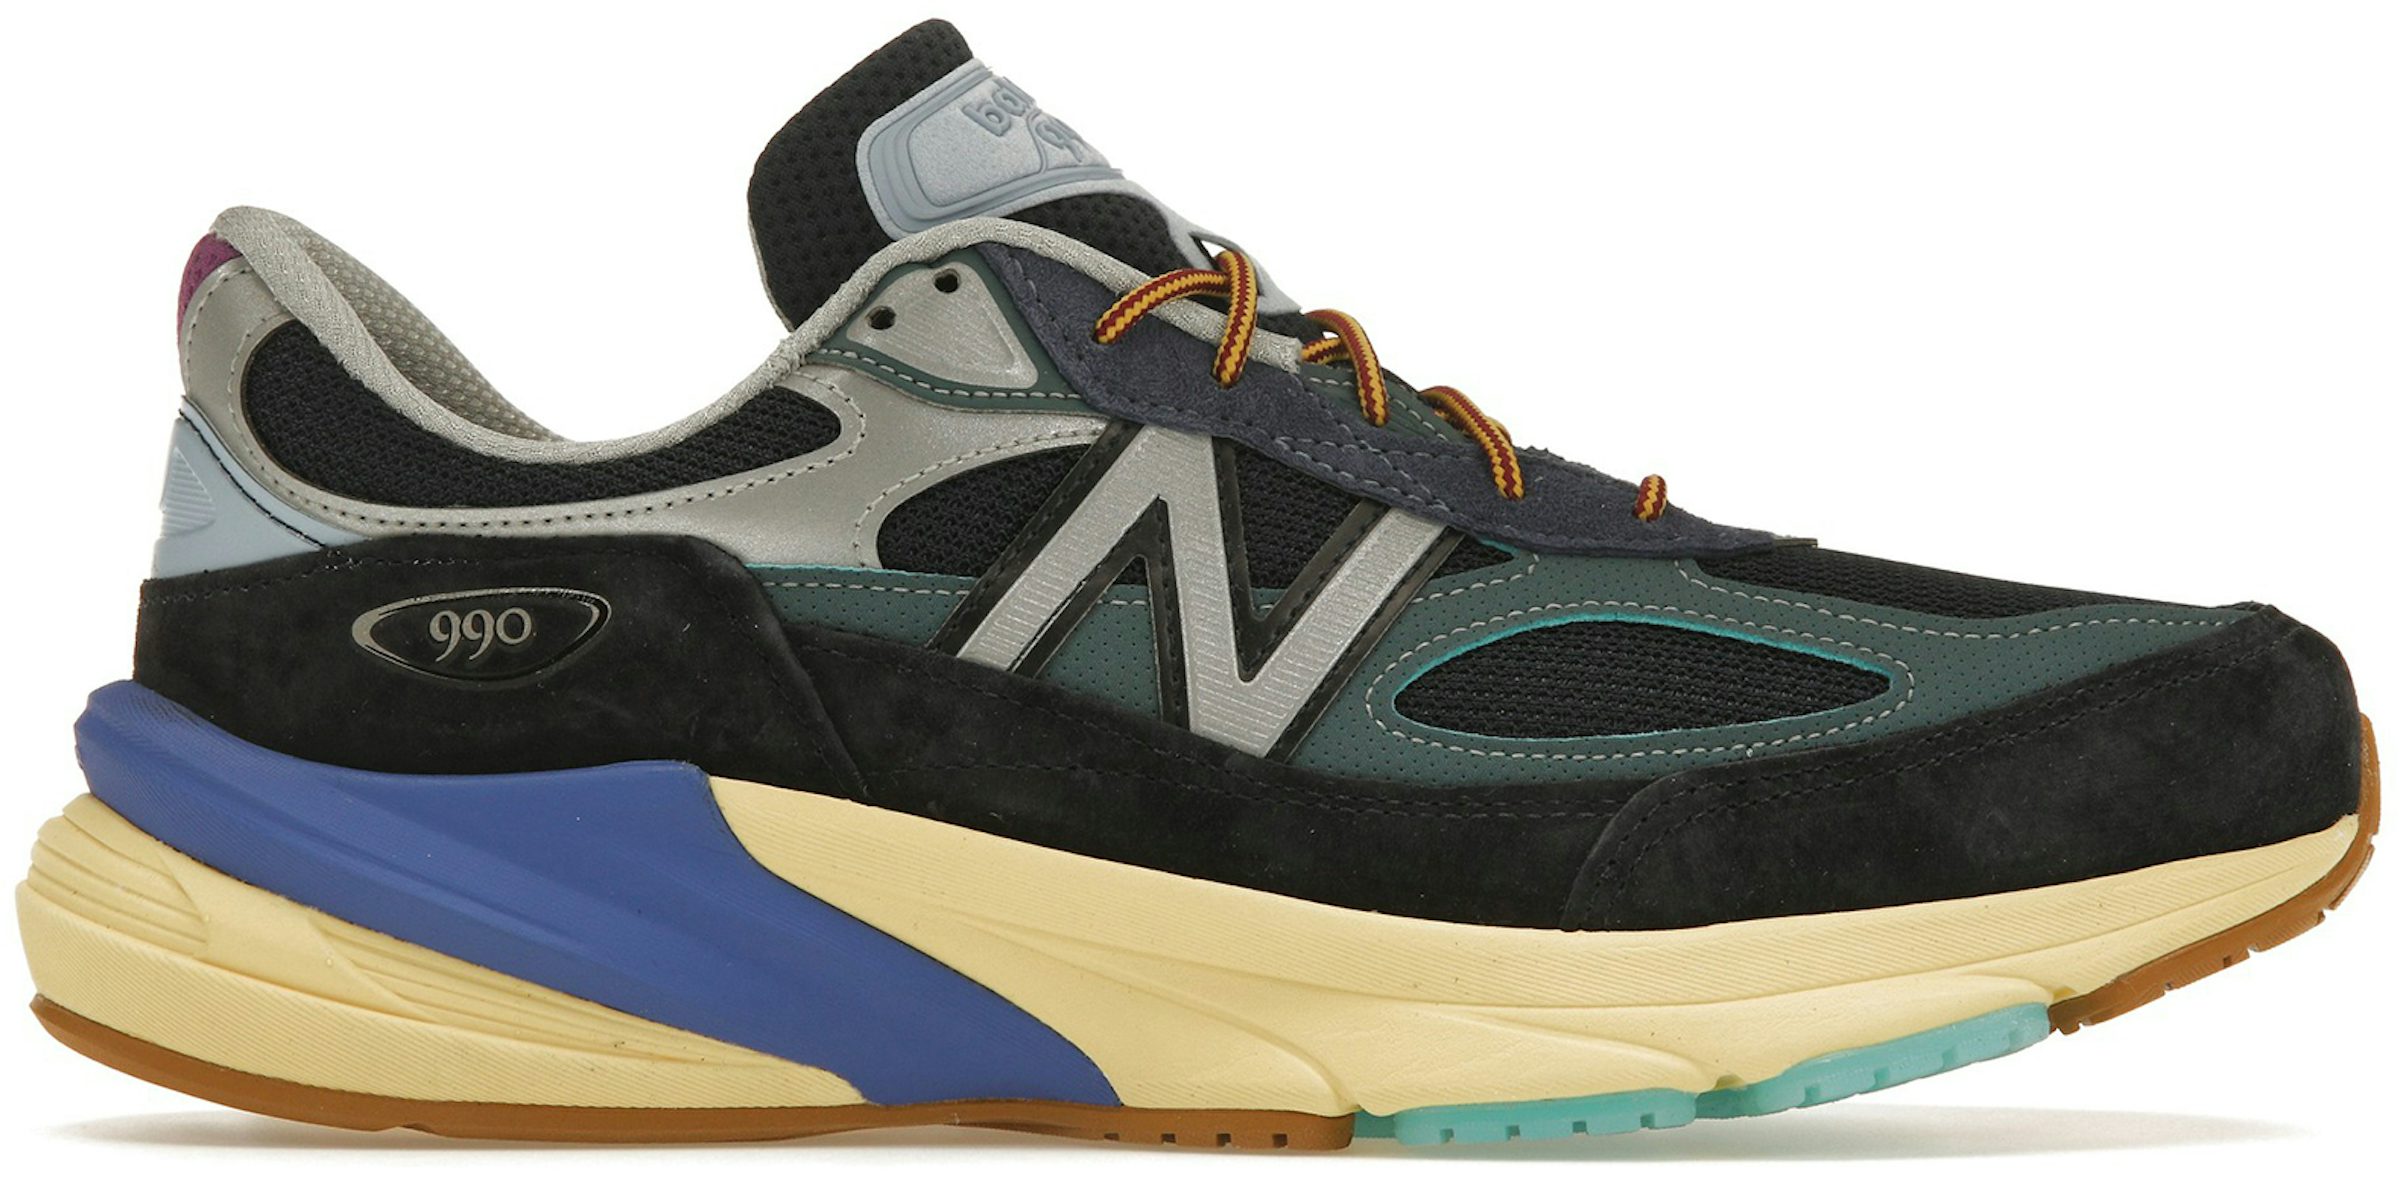 Action Bronson New Balance 990v6 Yellow Release Date